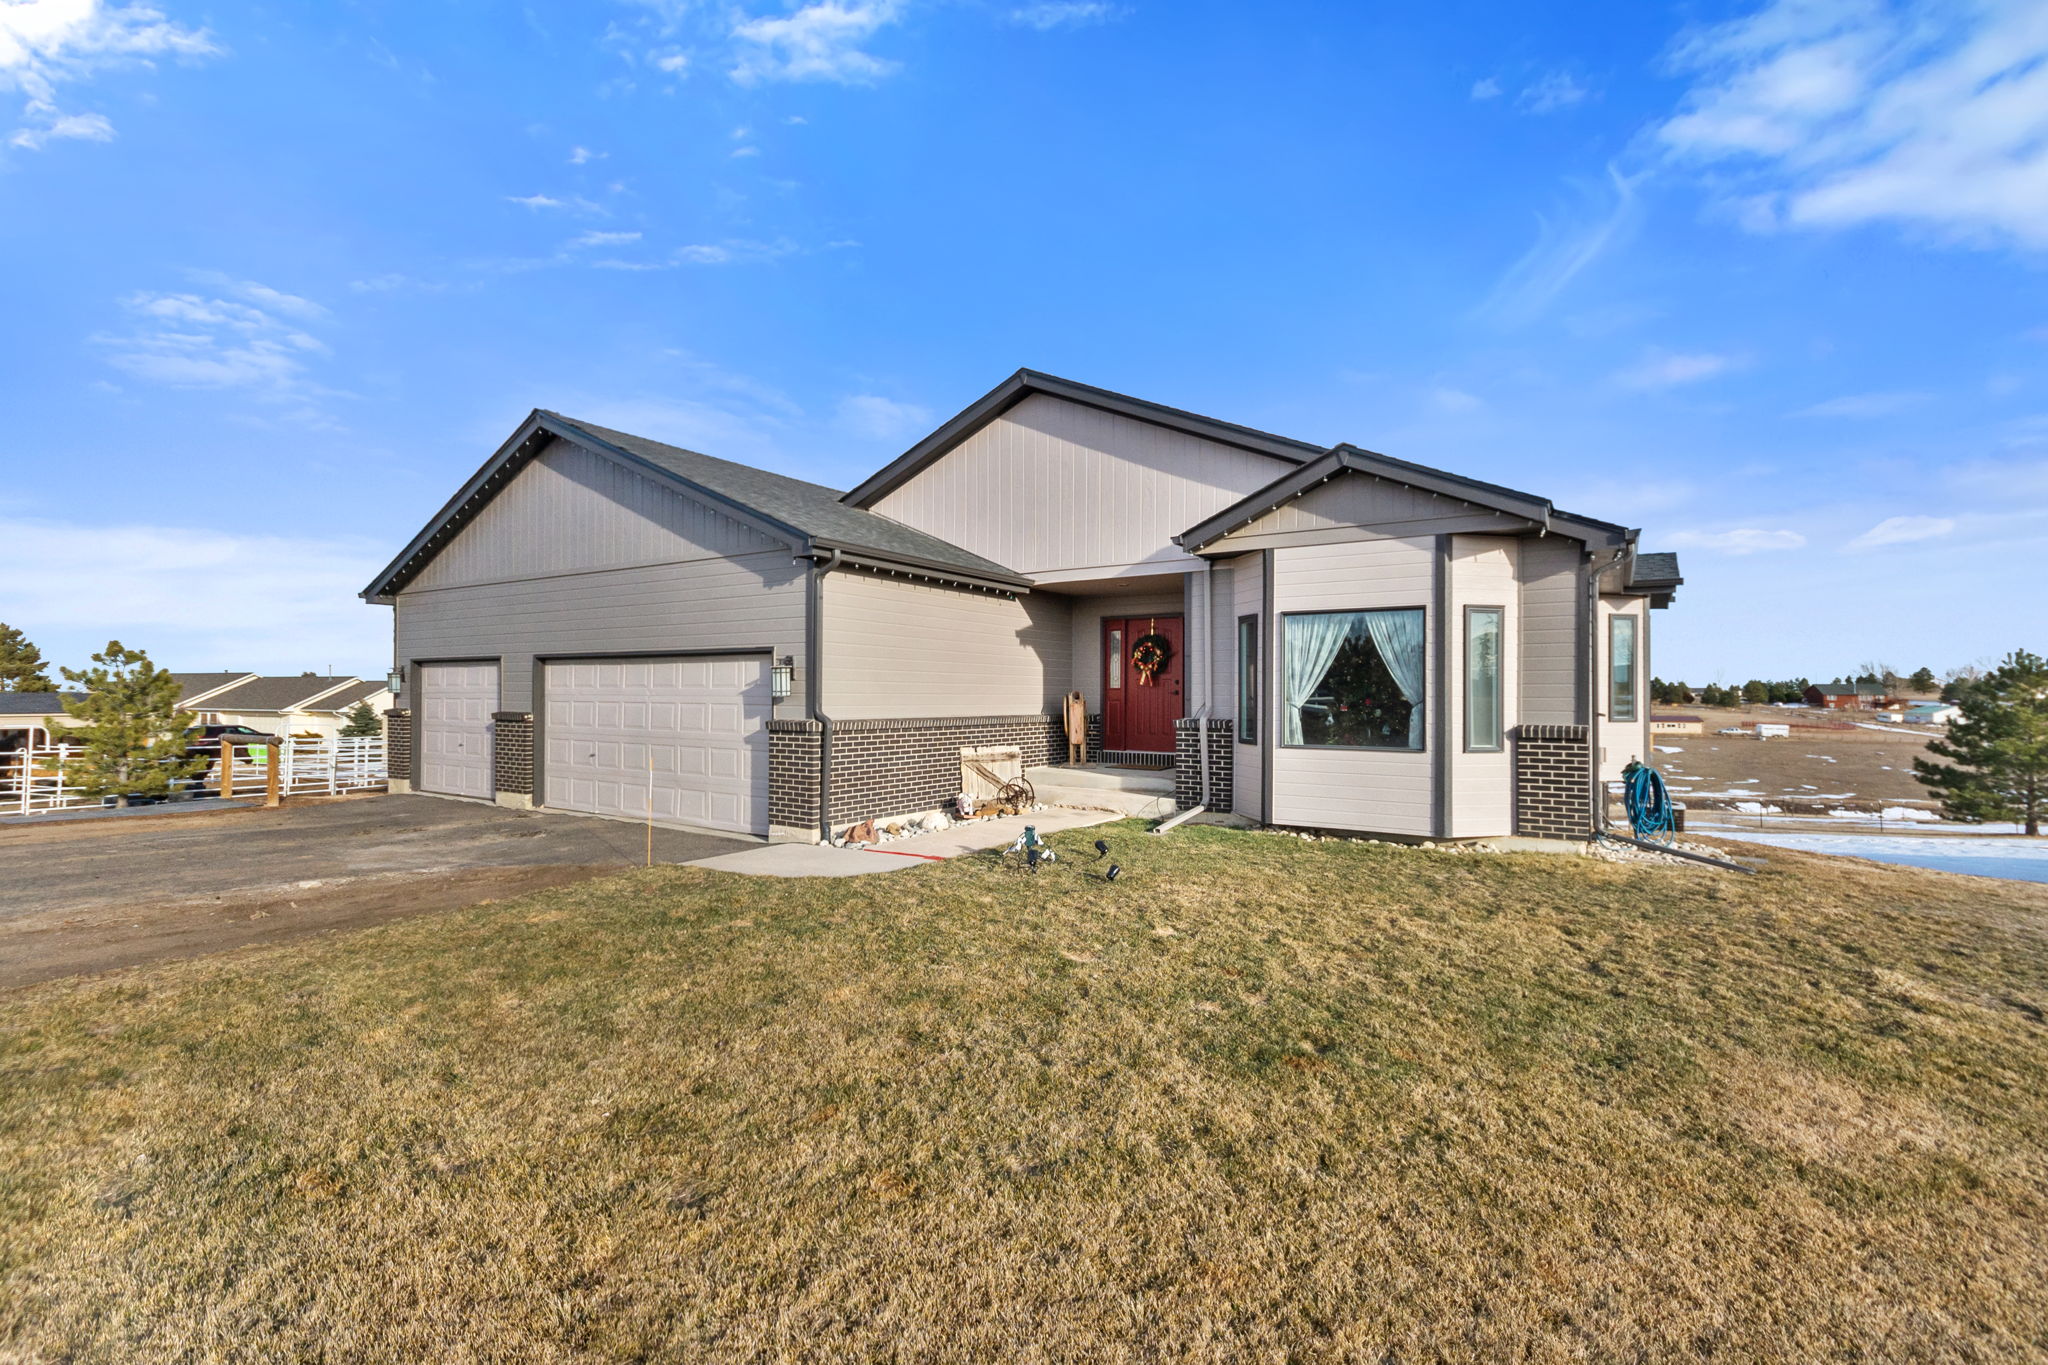  42386 Thunder Hill Rd, Parker, CO 80138, US Photo 3